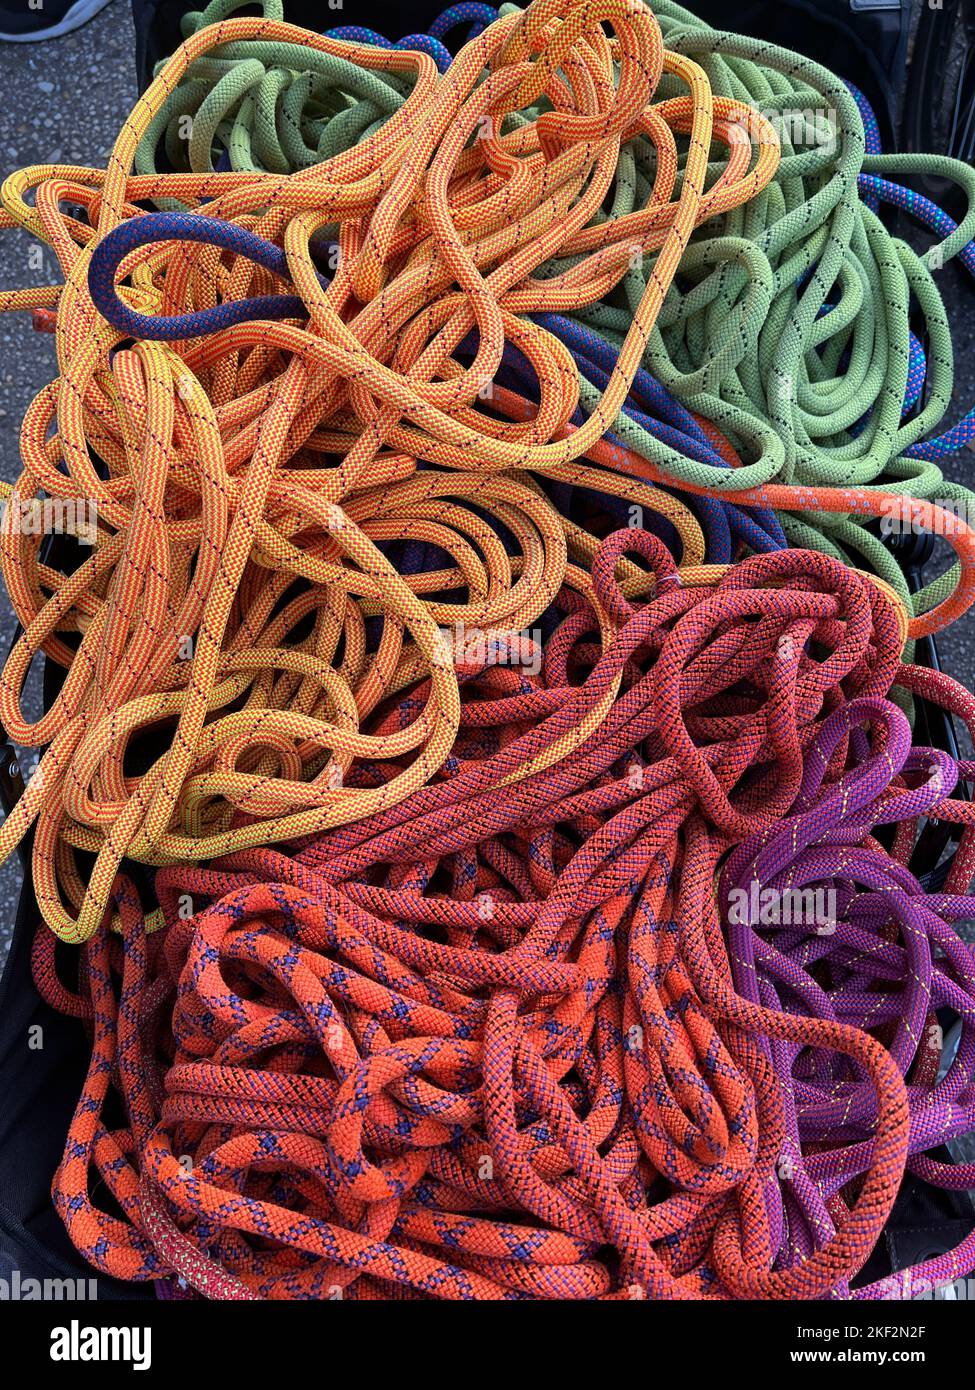 Rope of various colors. Stock Photo